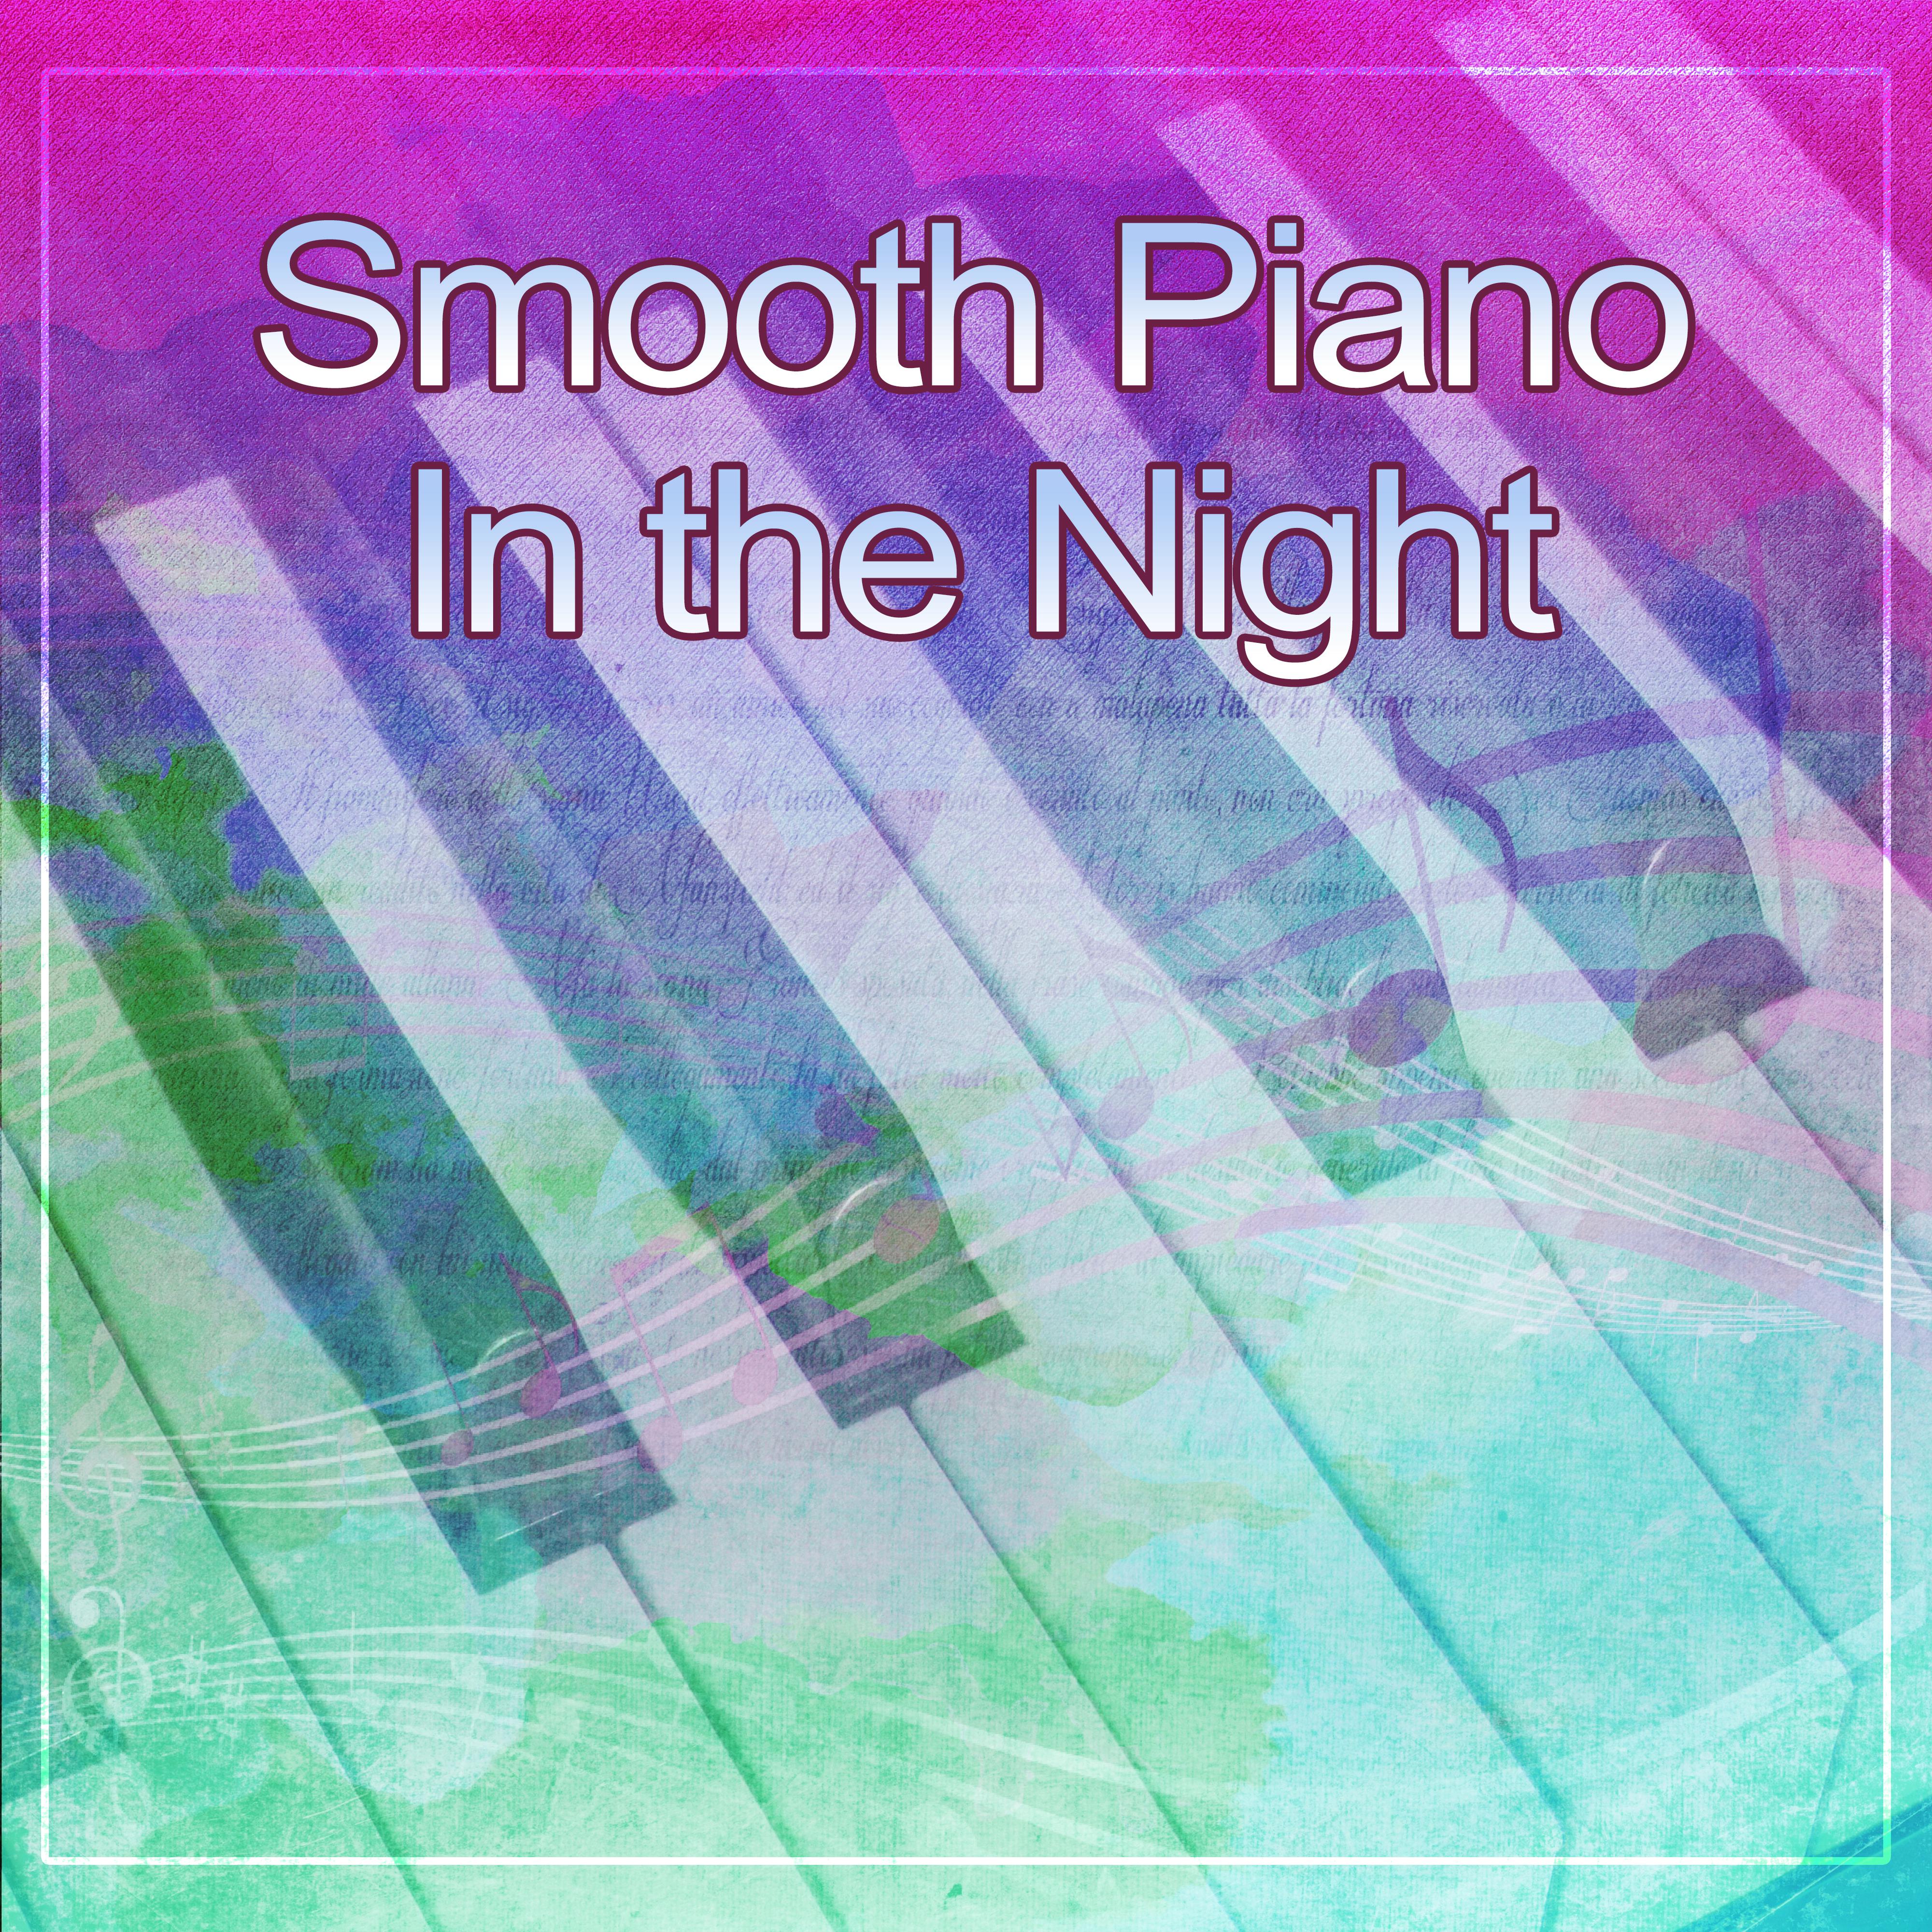 Smooth Piano In the Night – Best Smooth Jazz, Evening Piano Bar, Jazz for Everyone, Chill Blue Piano